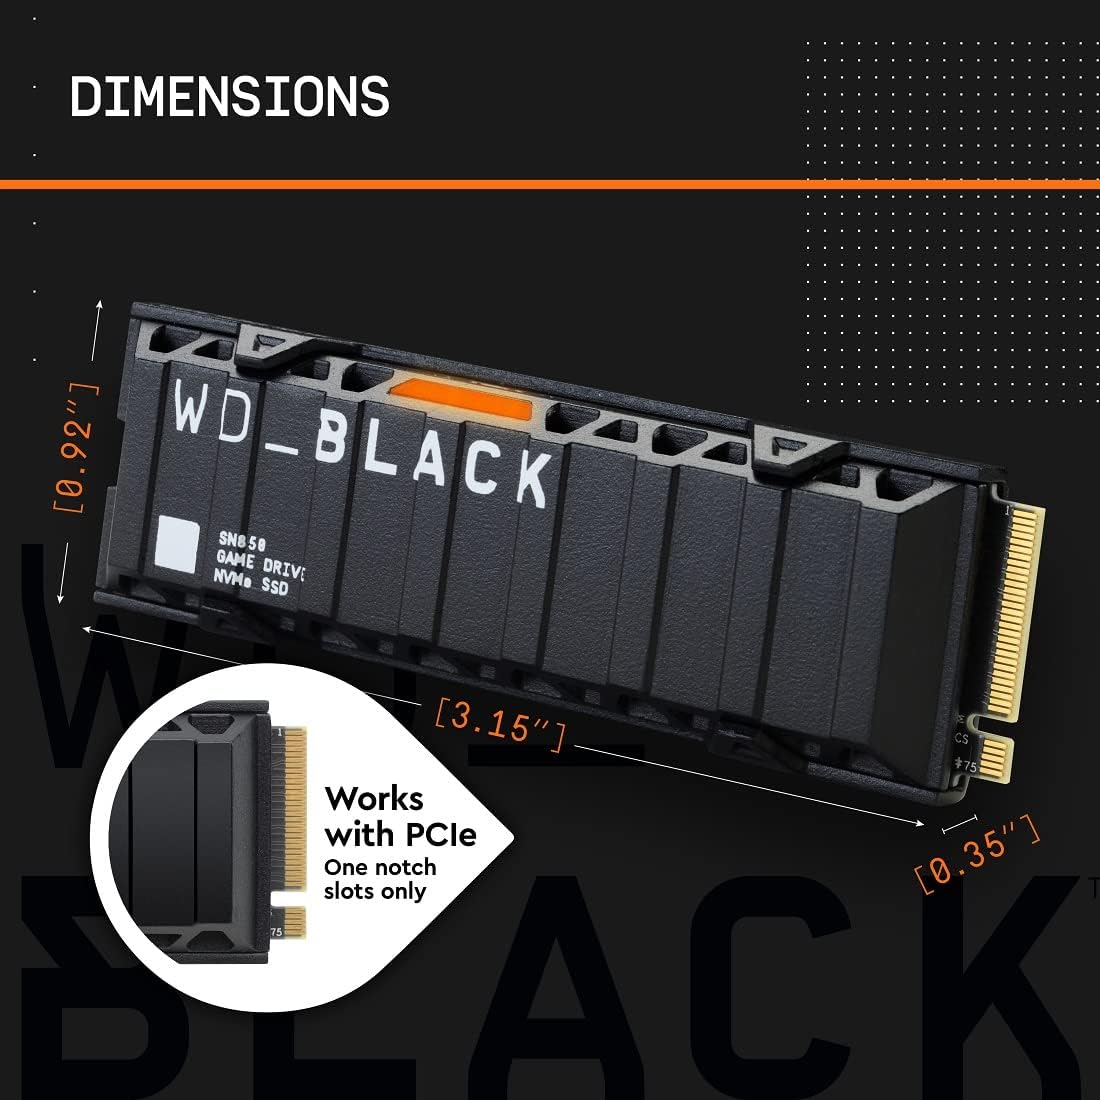 WD_BLACK 2TB SN850 NVMe Internal Gaming SSD Solid State Drive with Heatsink - $210